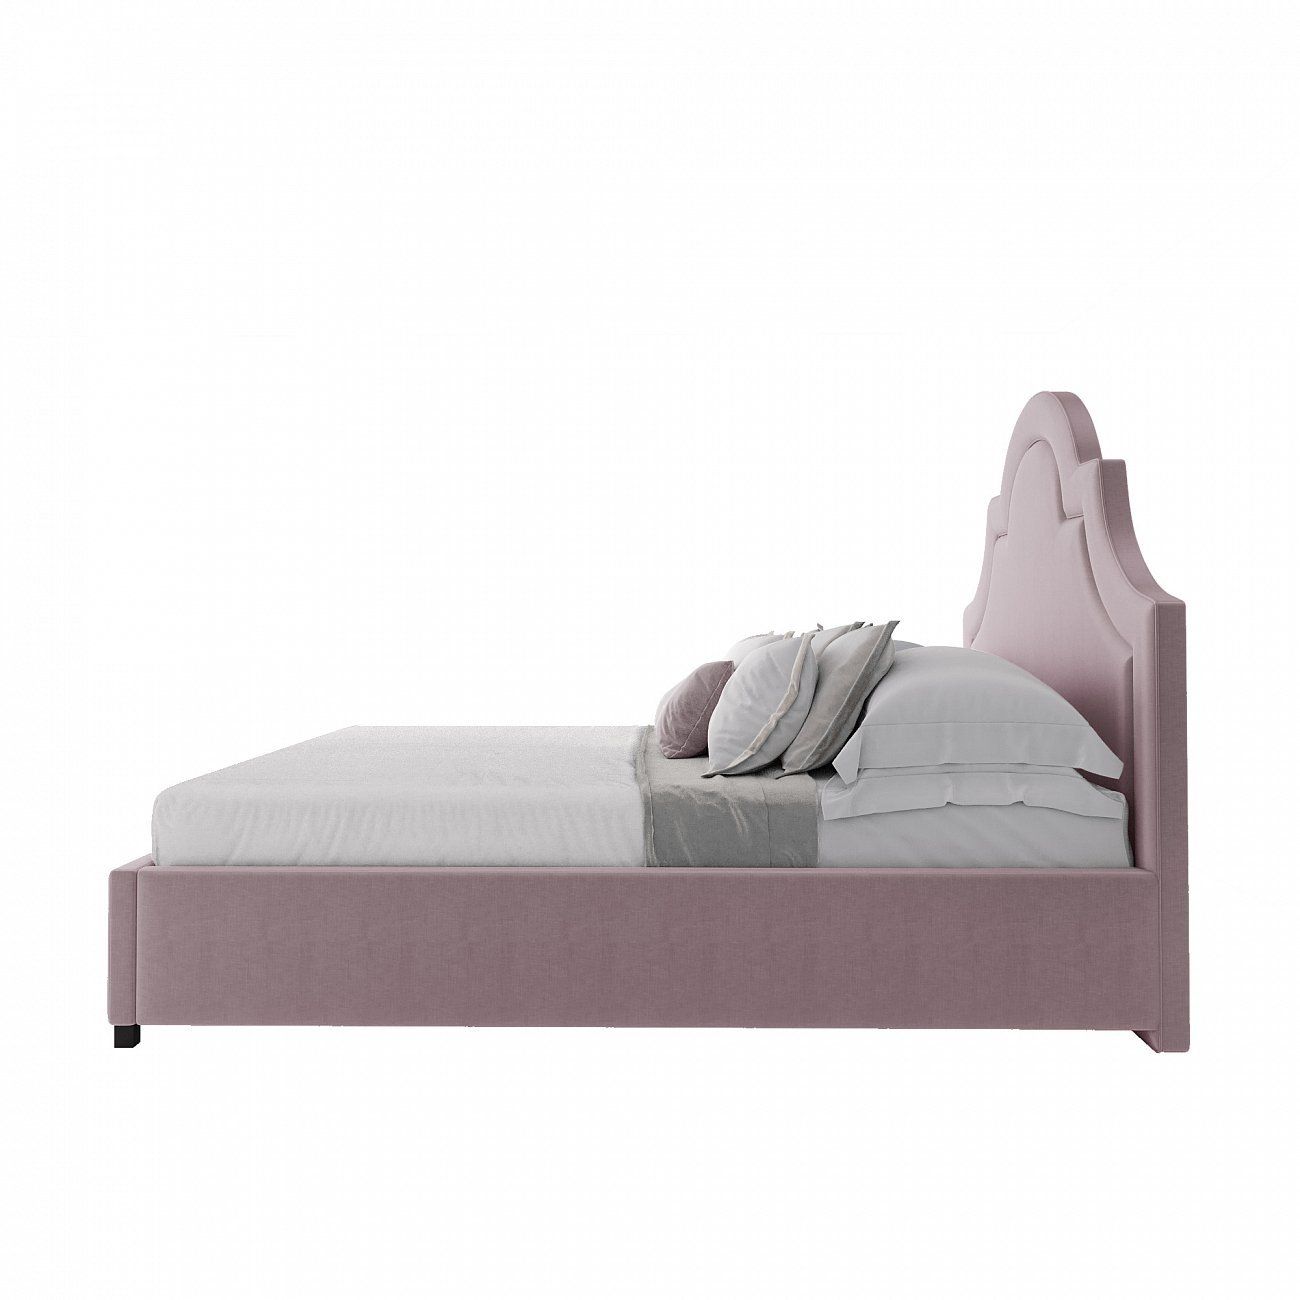 Double bed 180x200 cm pink Kennedy